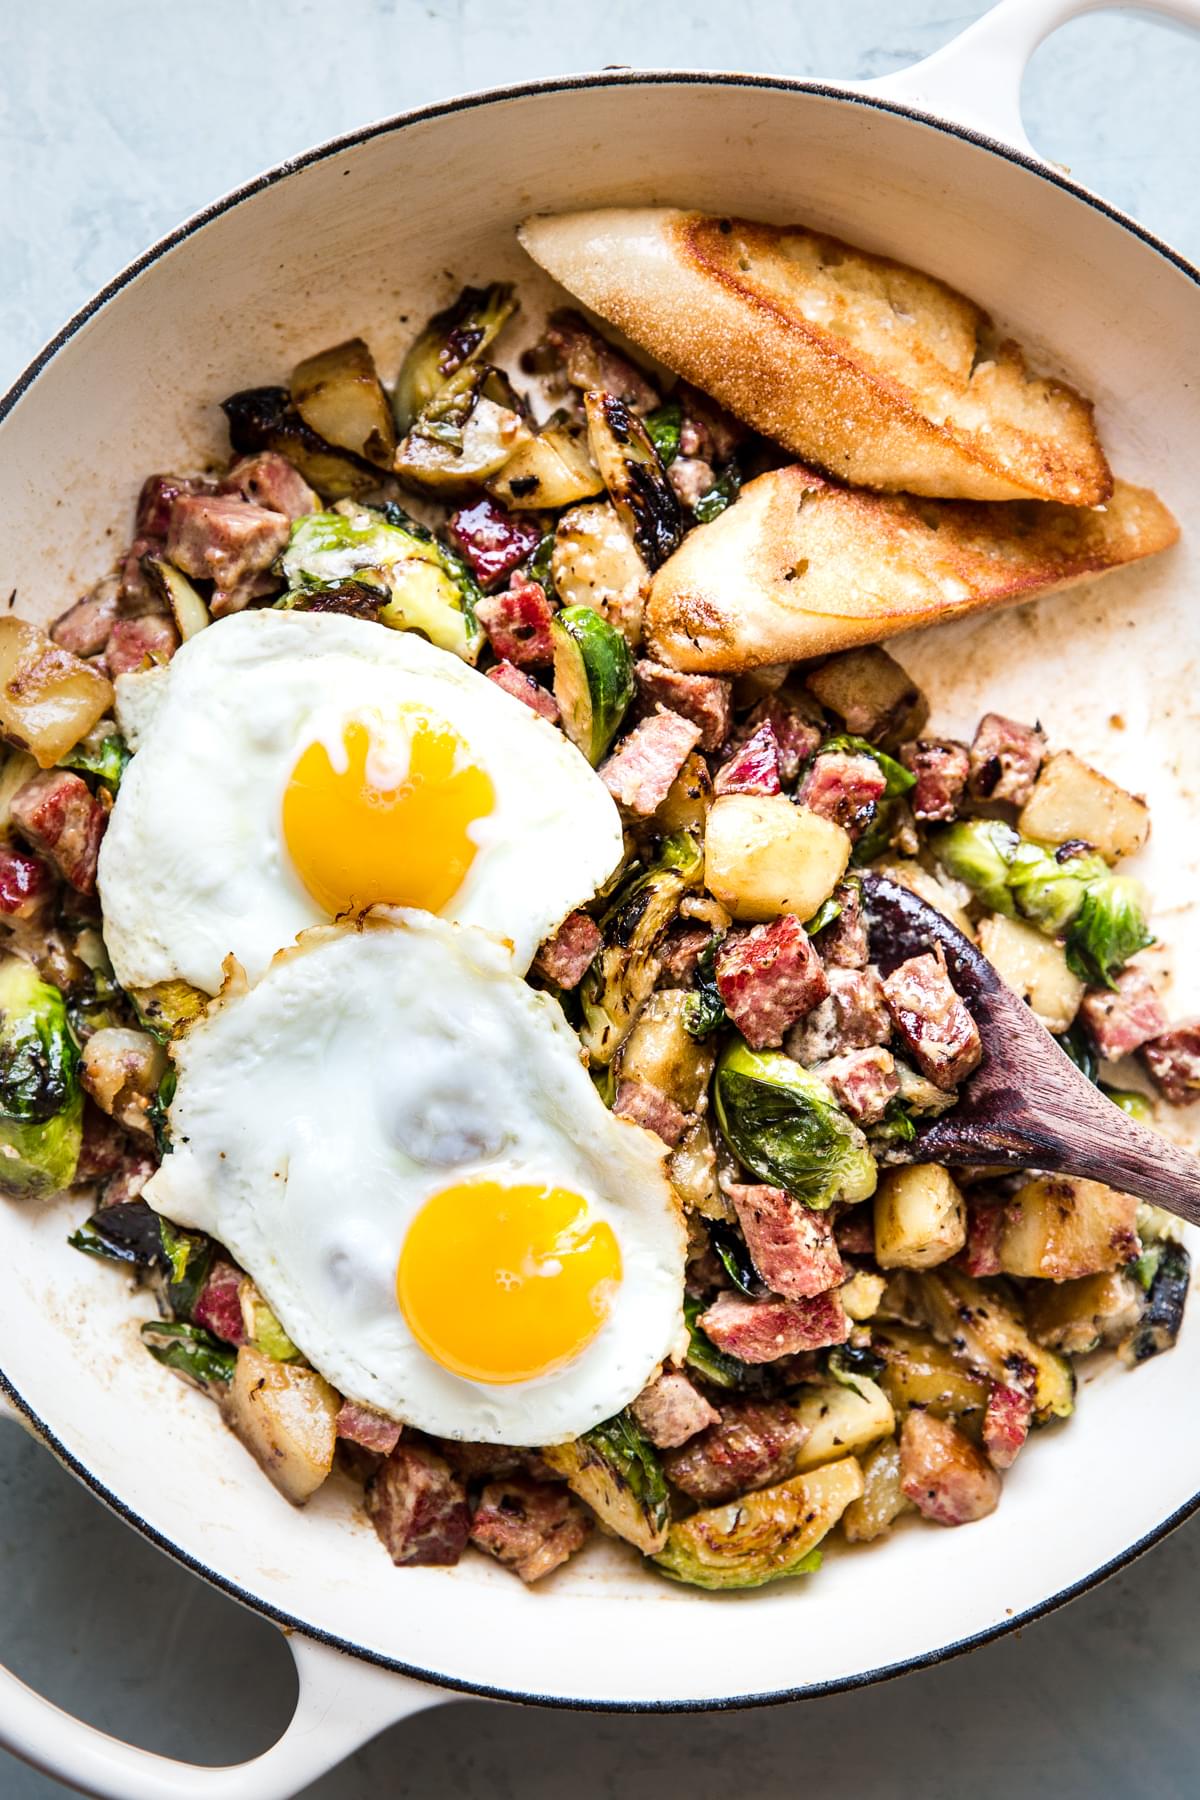 Corned beef hash with fried eggs and cream